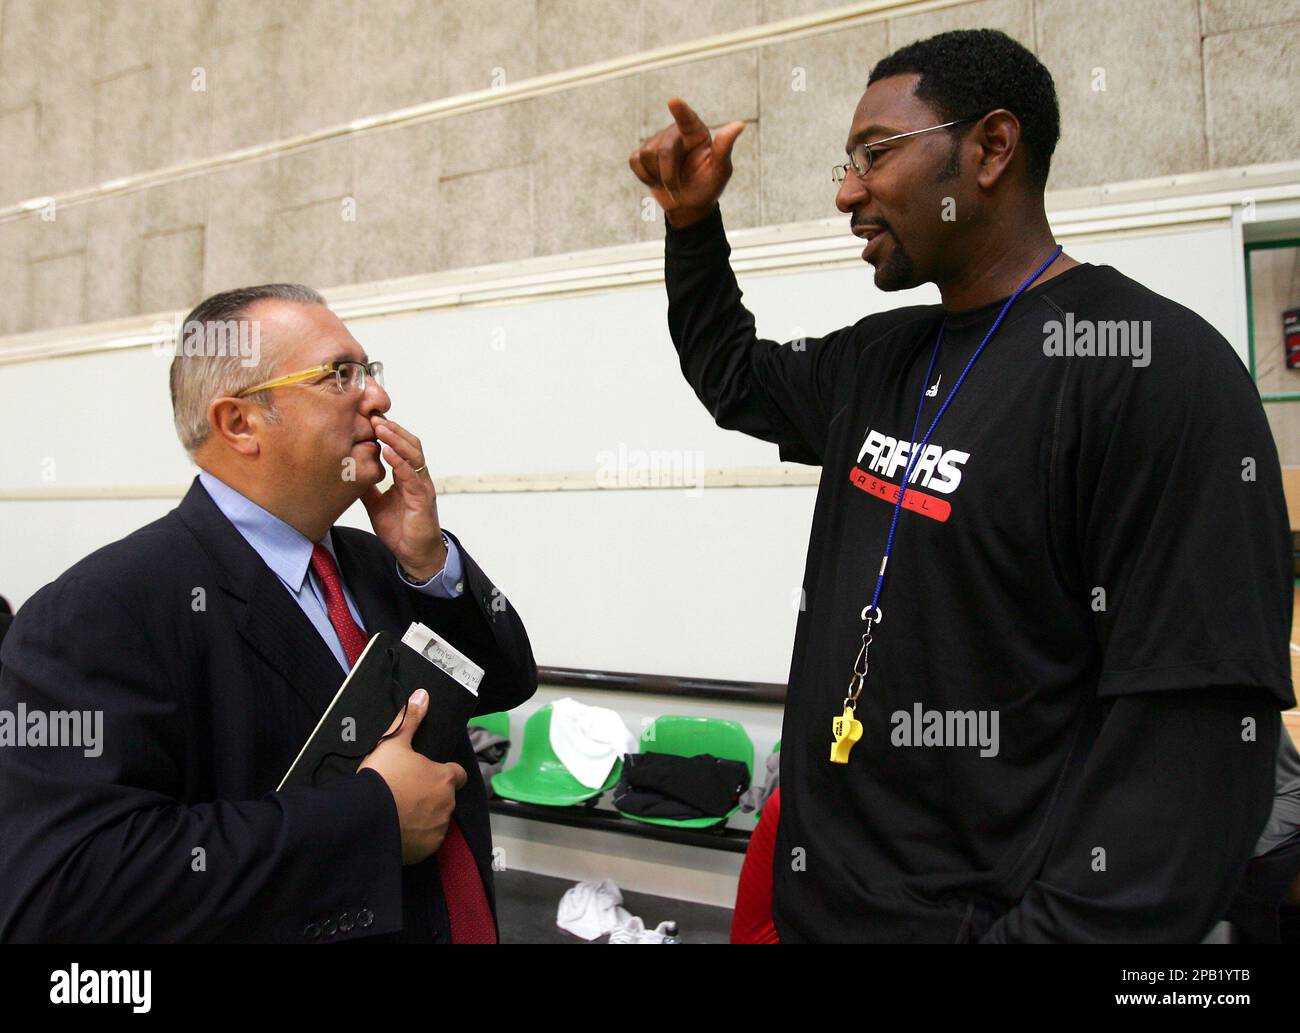 Toronto Raptors Vice-President Maurizio Gherardini of Italy, left, shares a word with coach Sam Mitchell at the end of a training session at "La Ghirada" in Treviso, Italy, Monday, Oct. 1, 2007. Toronto Raptors will play Boston Celtics in Rome on Oct. 6, 2007, part of an NBA Europe Live Tour.(AP Photo/Franco Debernardi) Stock Photo